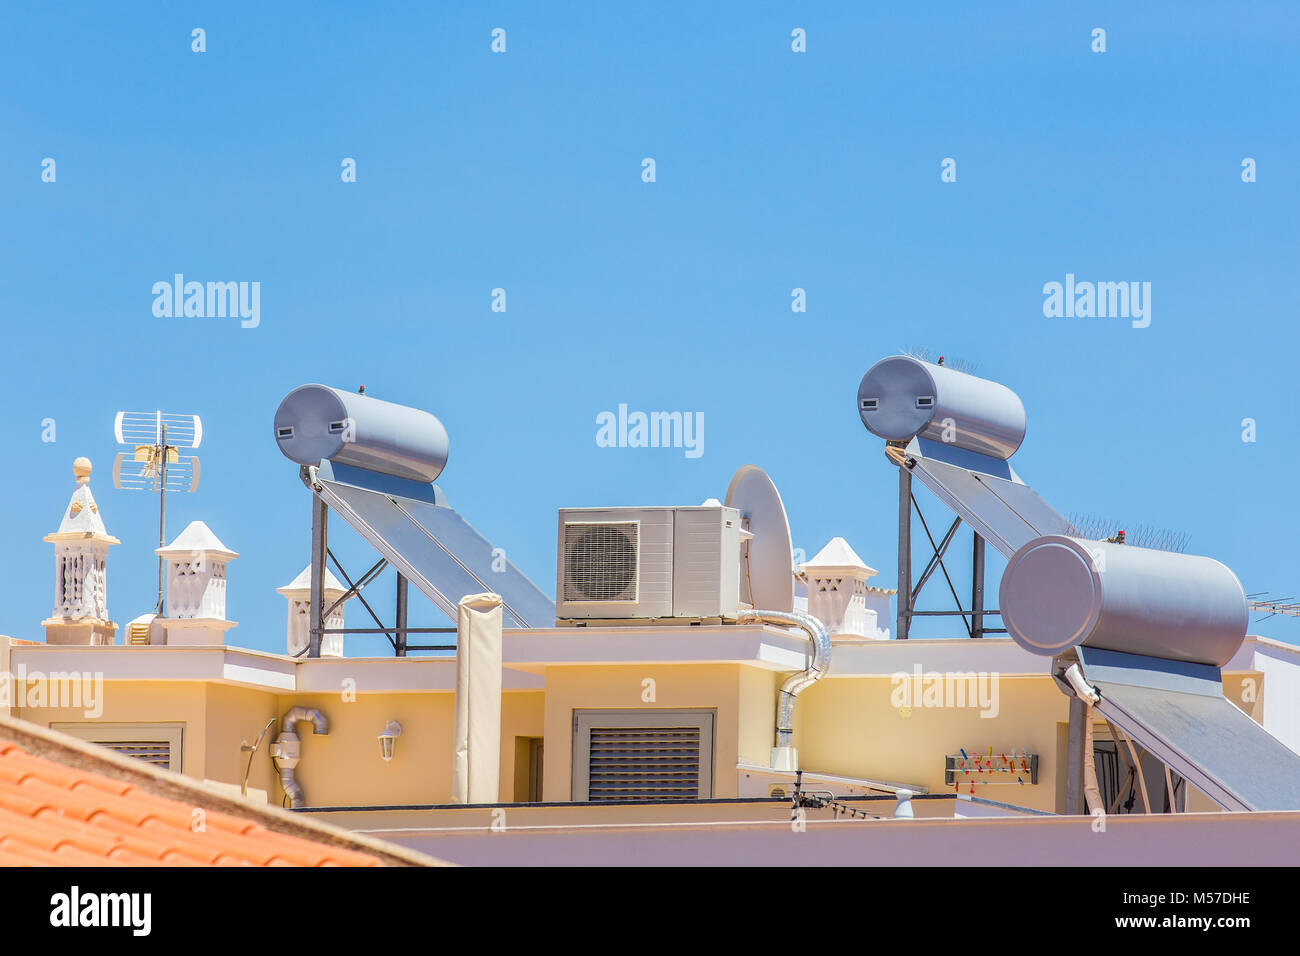 Solar panels and boilers on roof of building Stock Photo